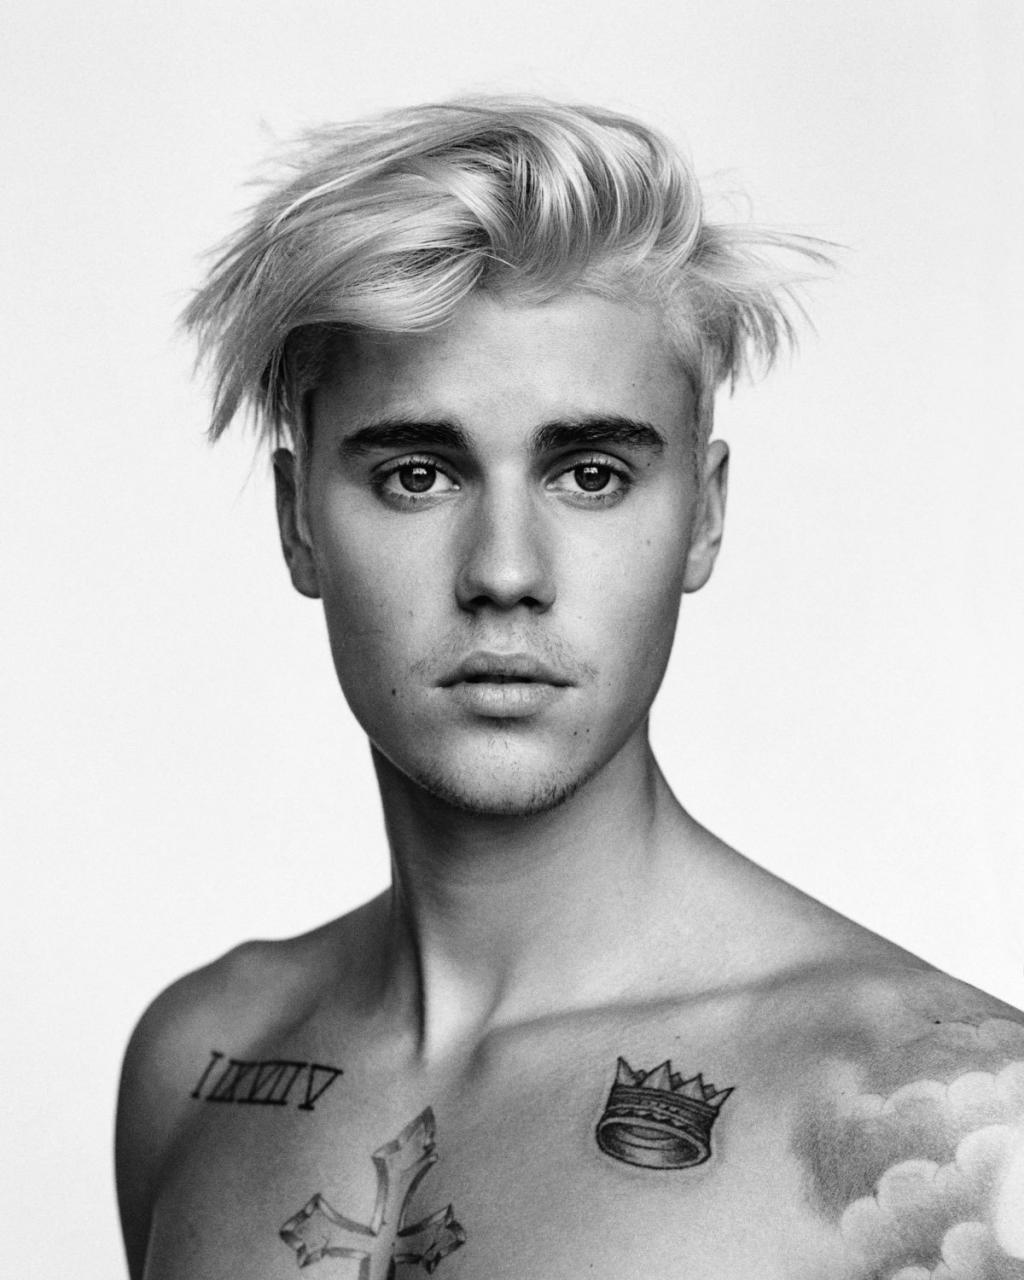 Justin Bieber Exclusive Interview, Shoot And Video: The